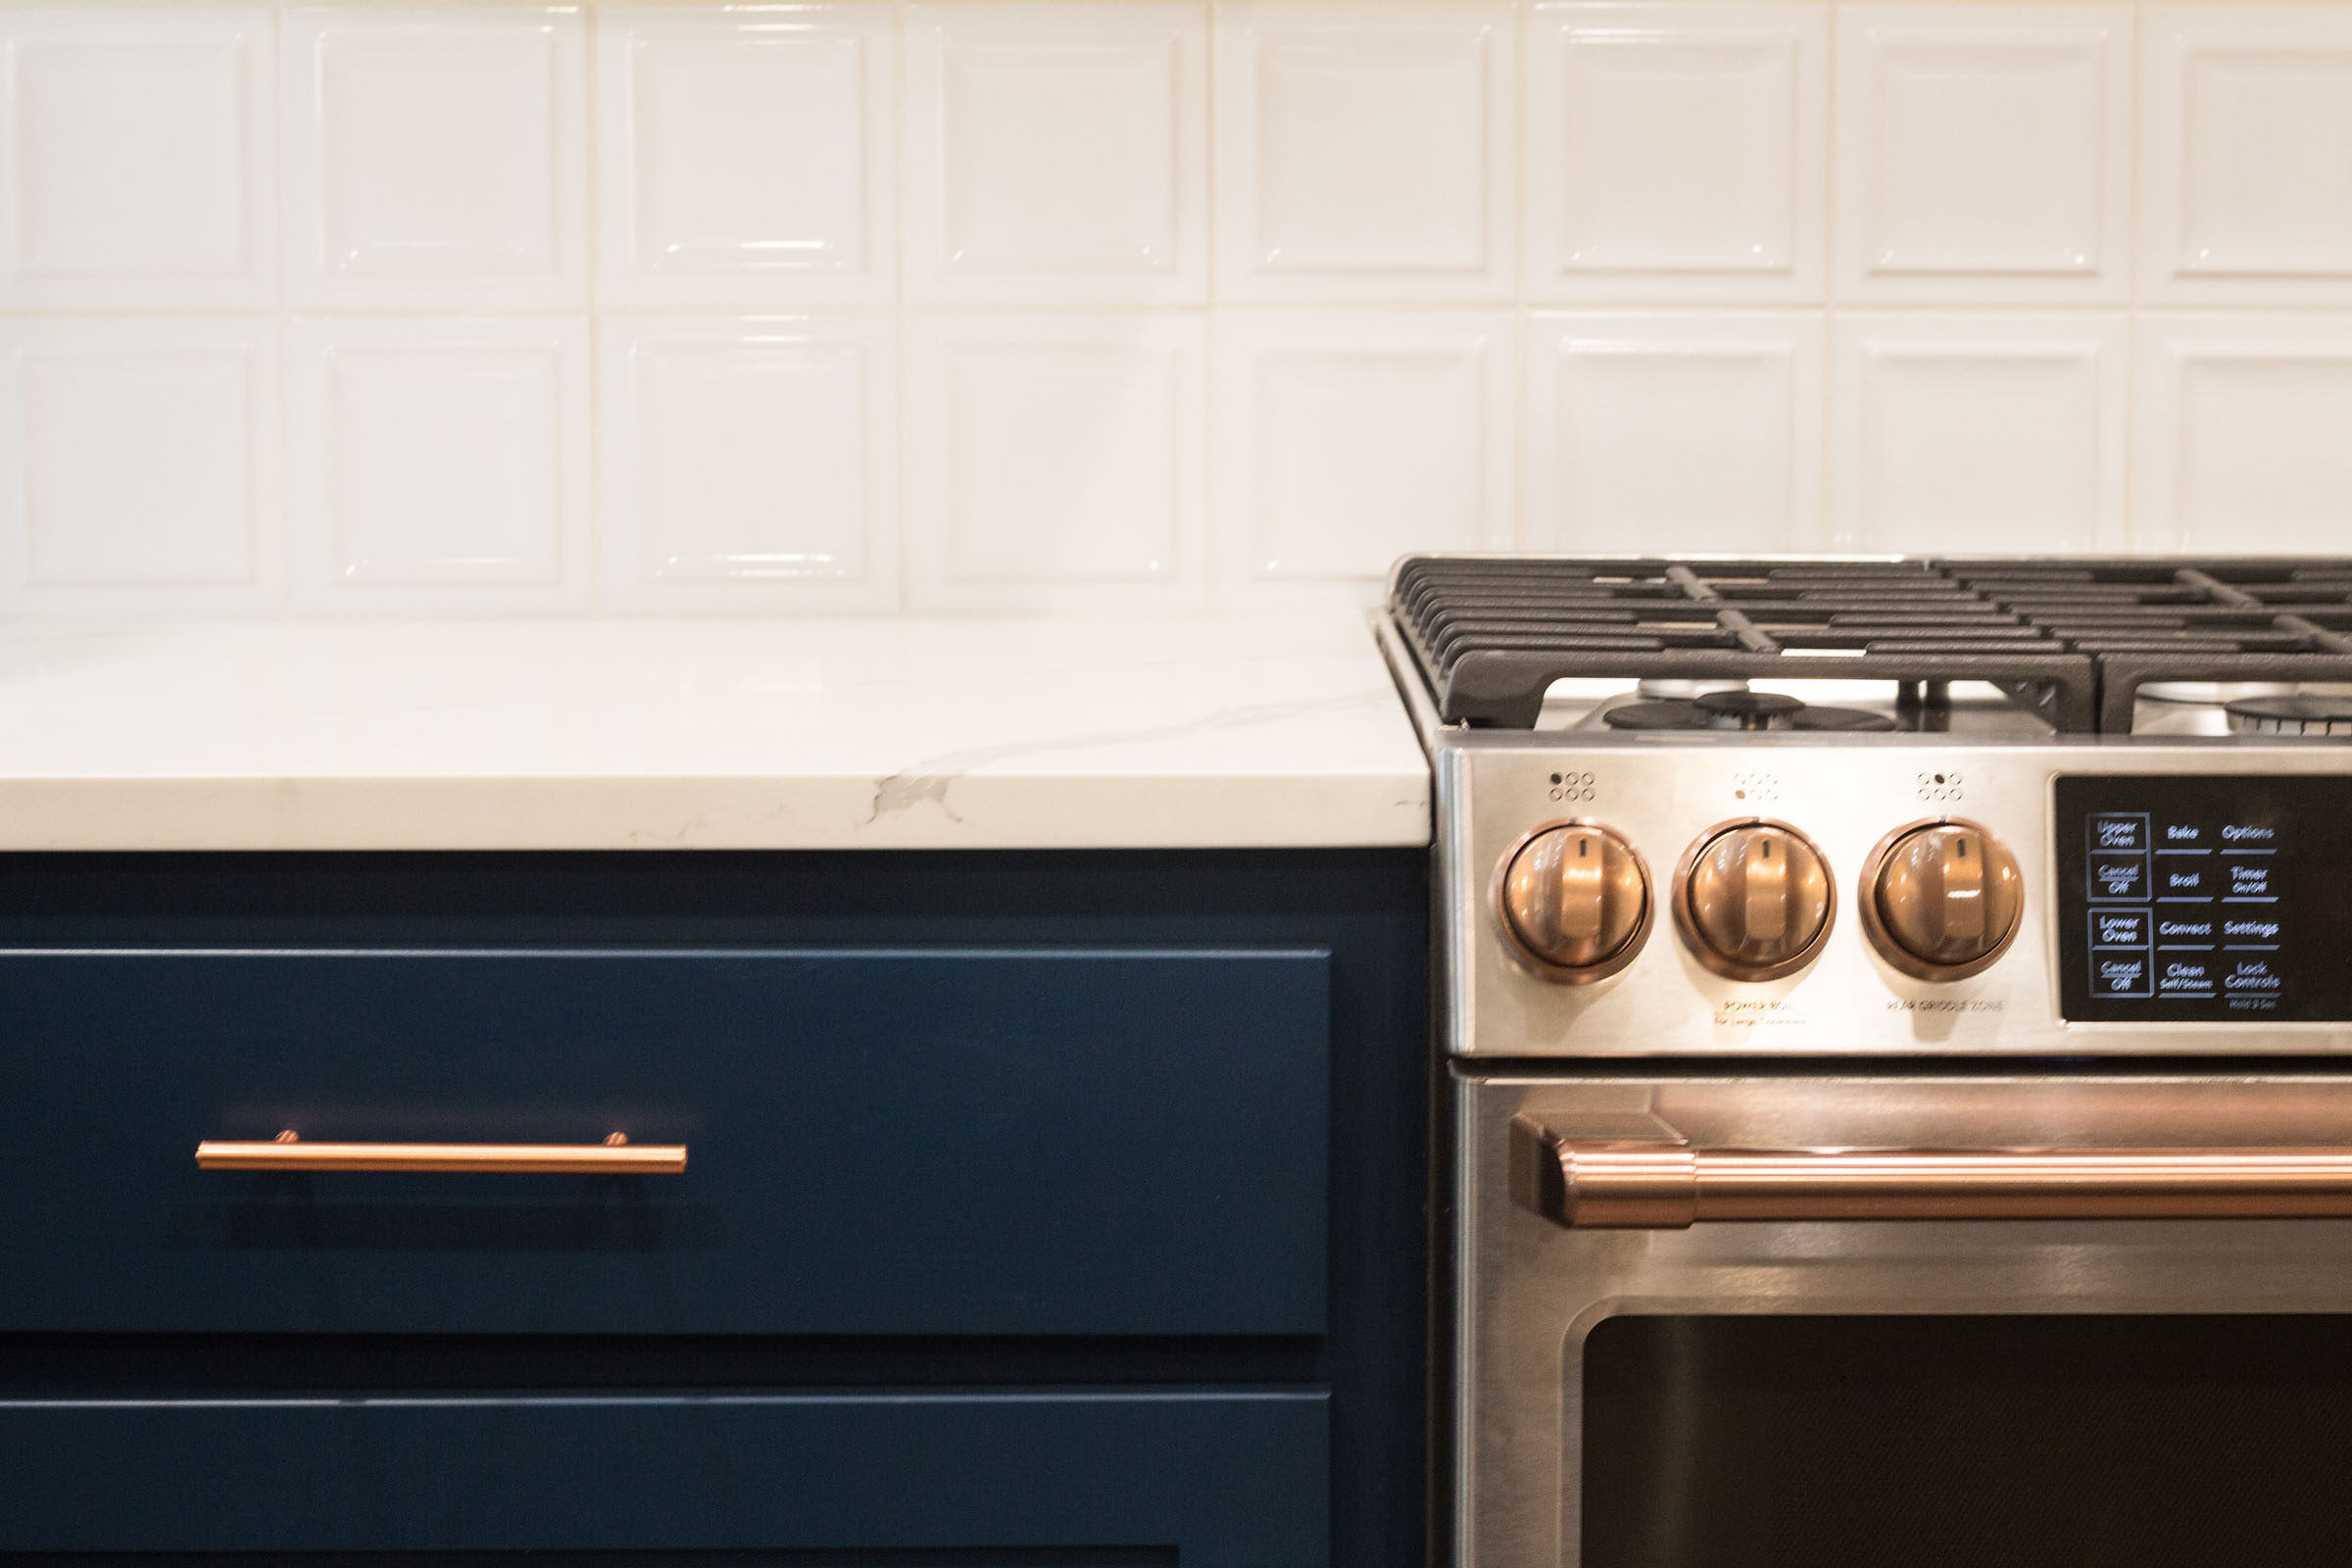 Navy drawers, stainless steel gas range, copper accents, kitchen remodel